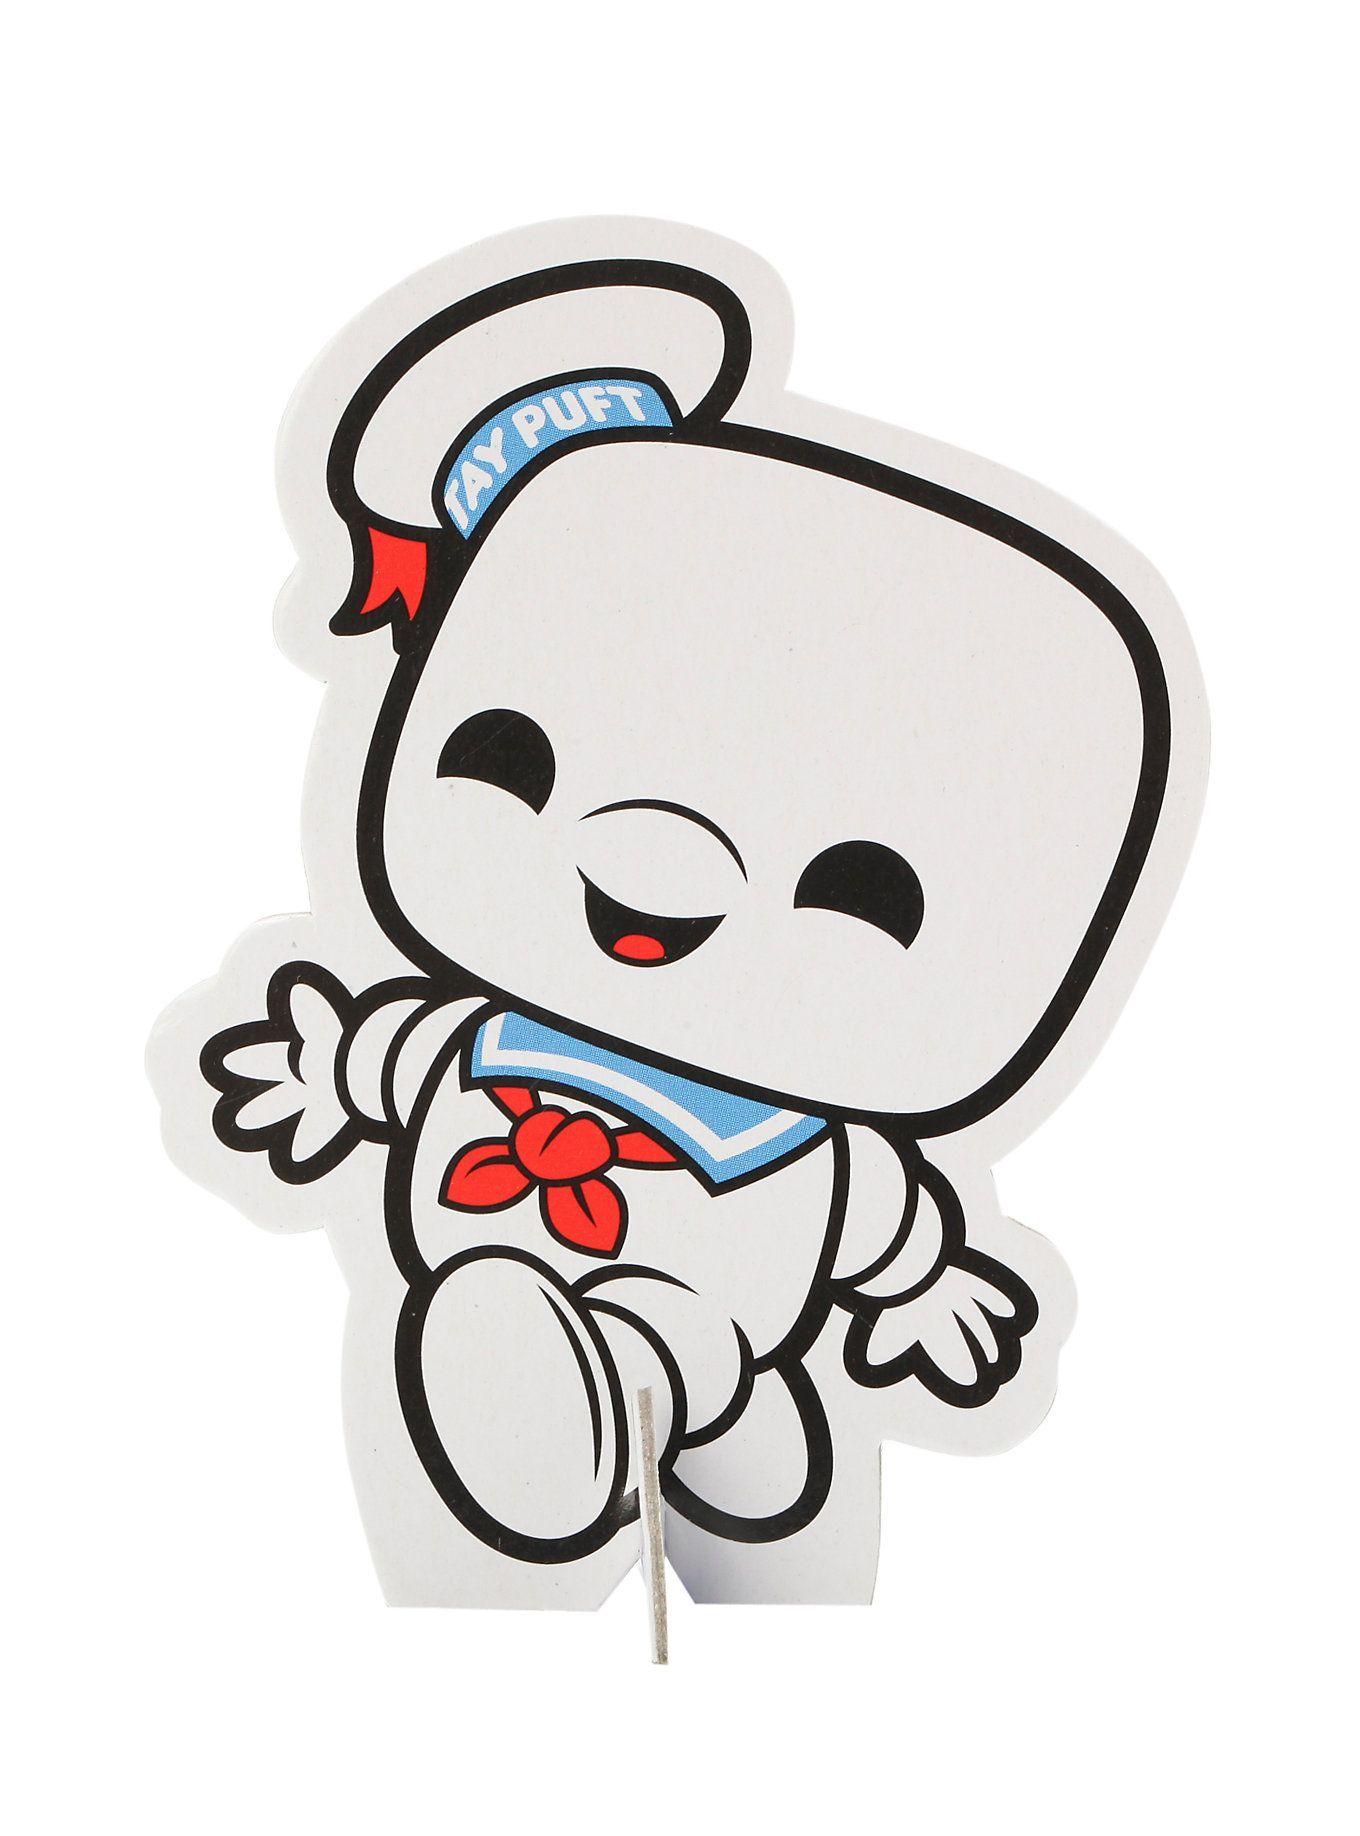 Funko Ghostbusters Pop! Stay Puft Marshmallow Man T Shirt Hot Topic